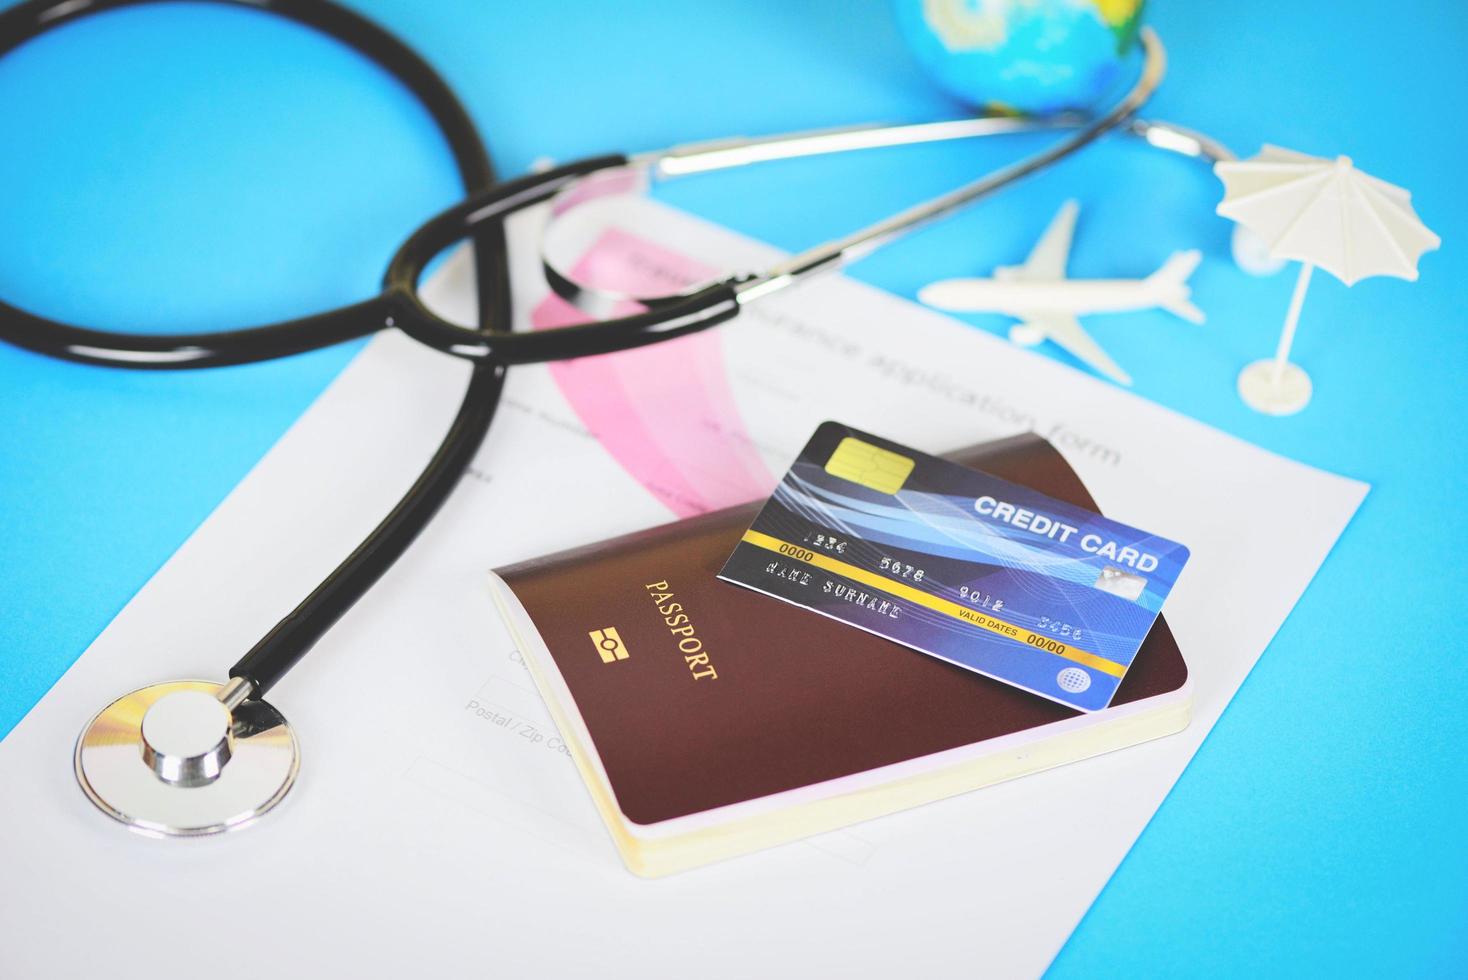 Travel insurance application form with  passport credit cards and stethoscope on blue background - Air travelling for health or global healthcare concept photo